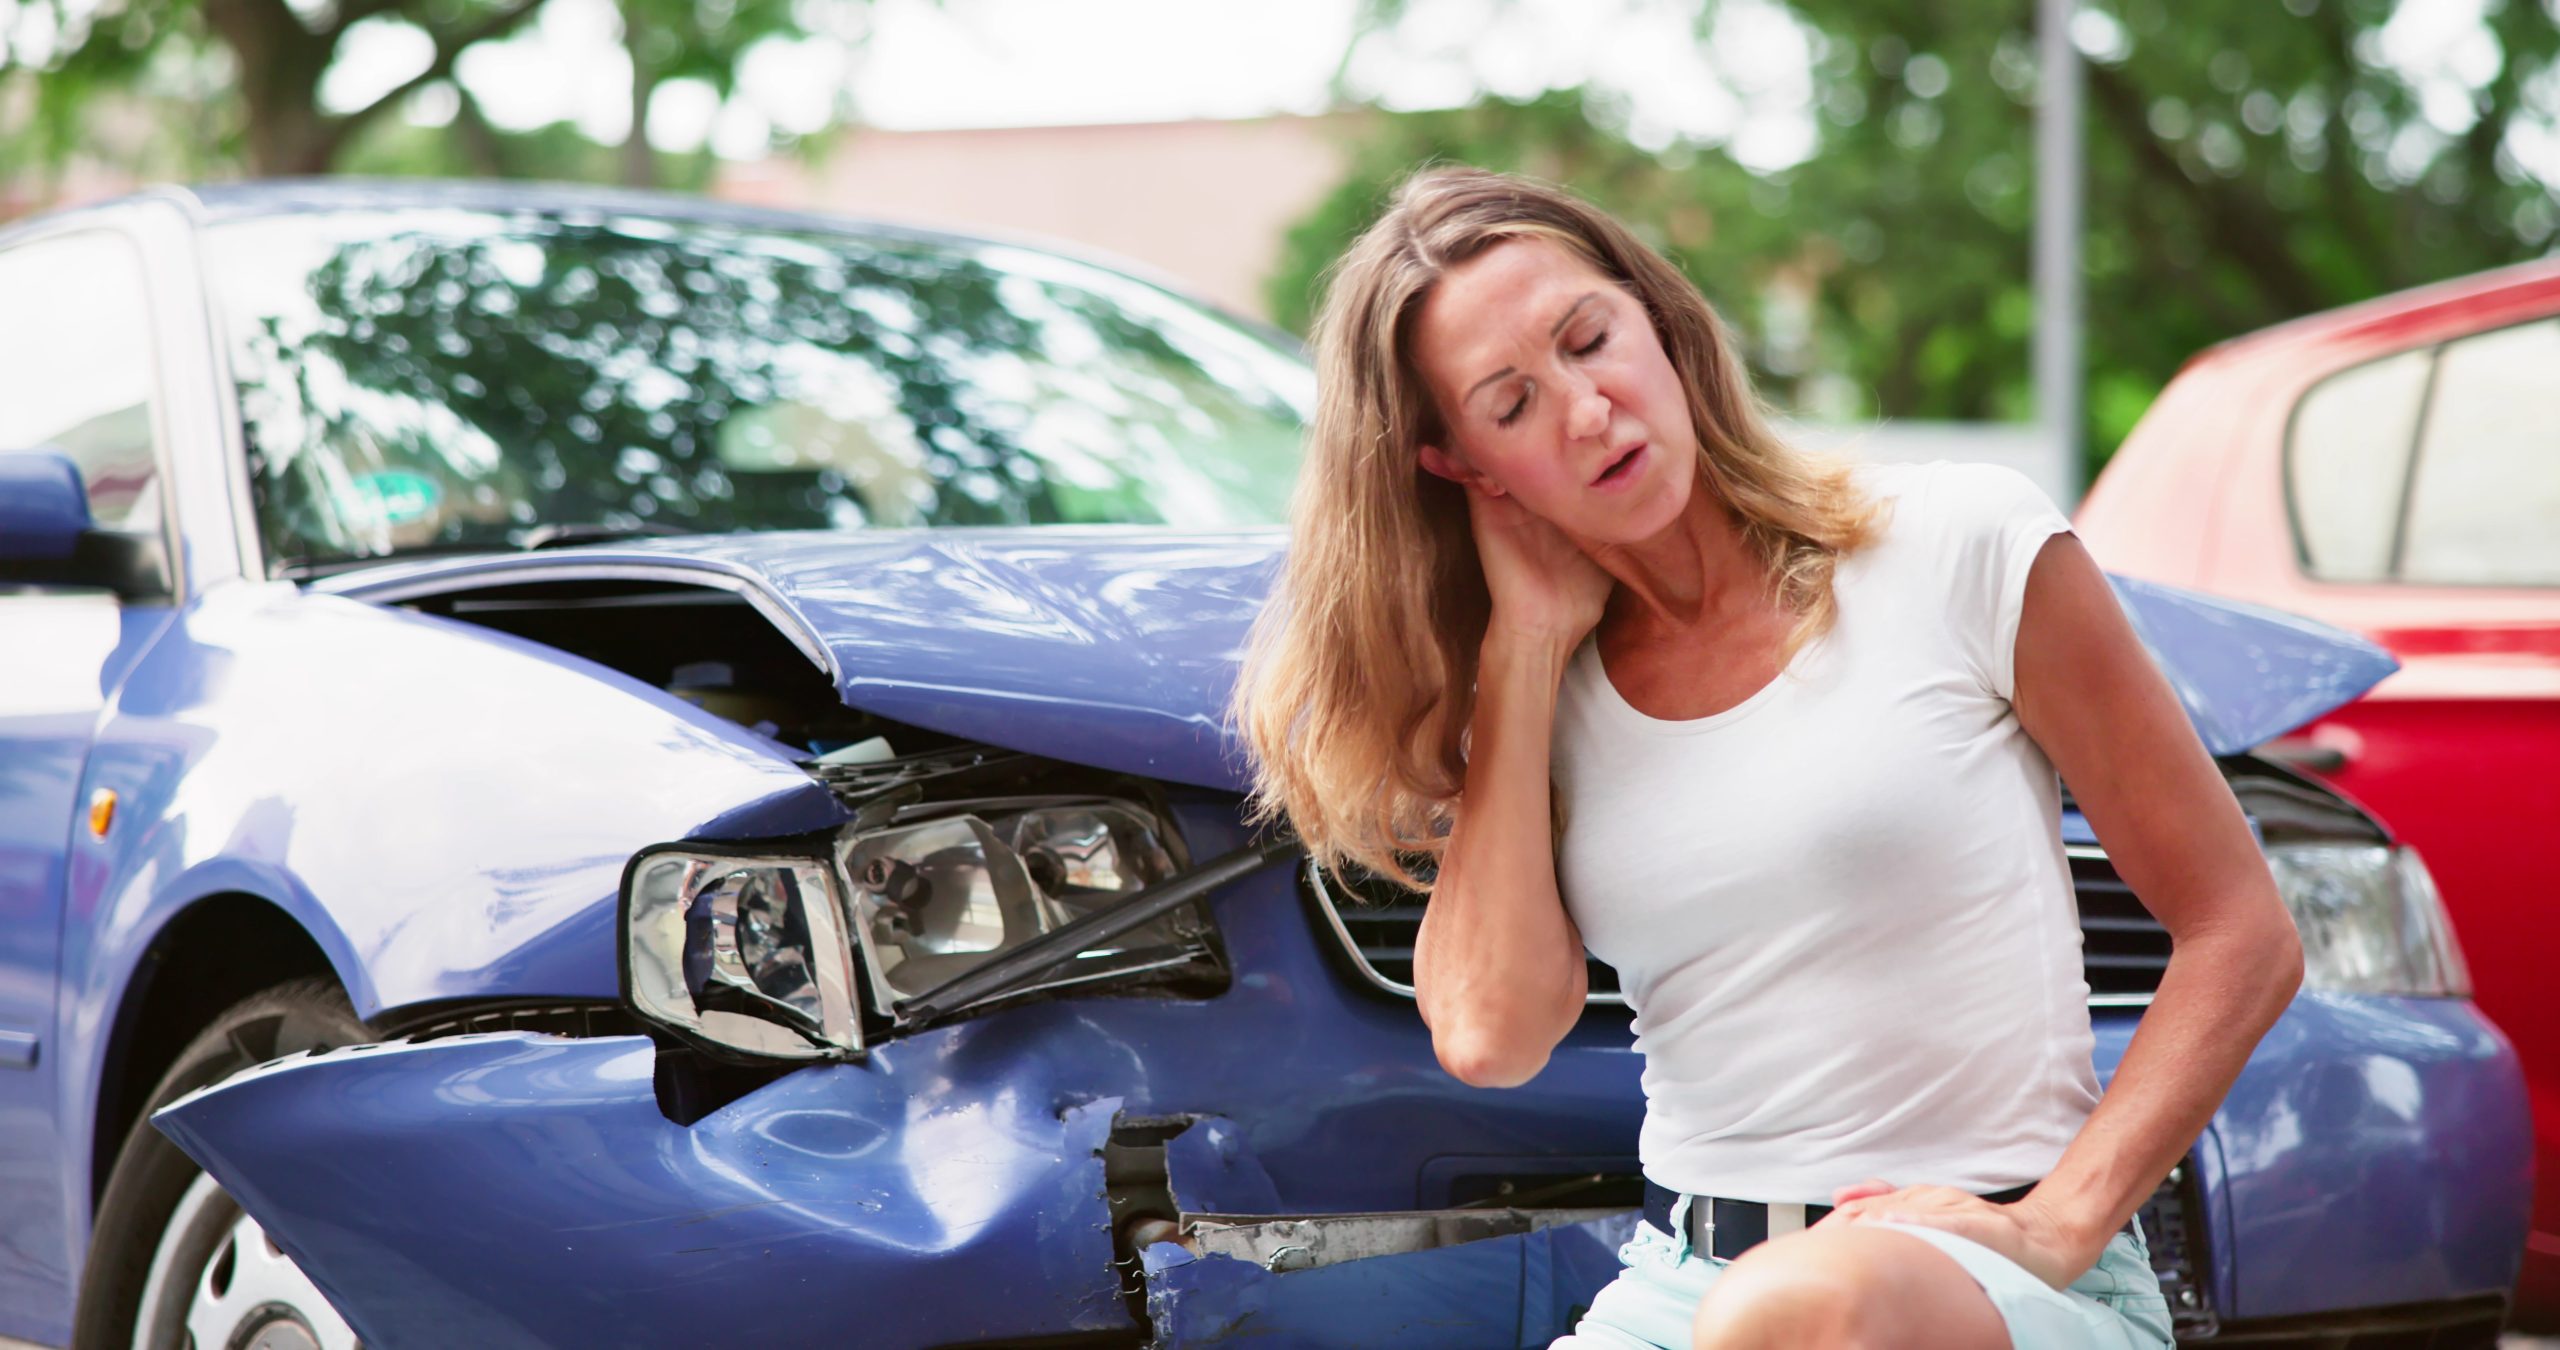 Chiropractic Treatment For Car/Auto Accident Injury Near Lake Stevens, WA